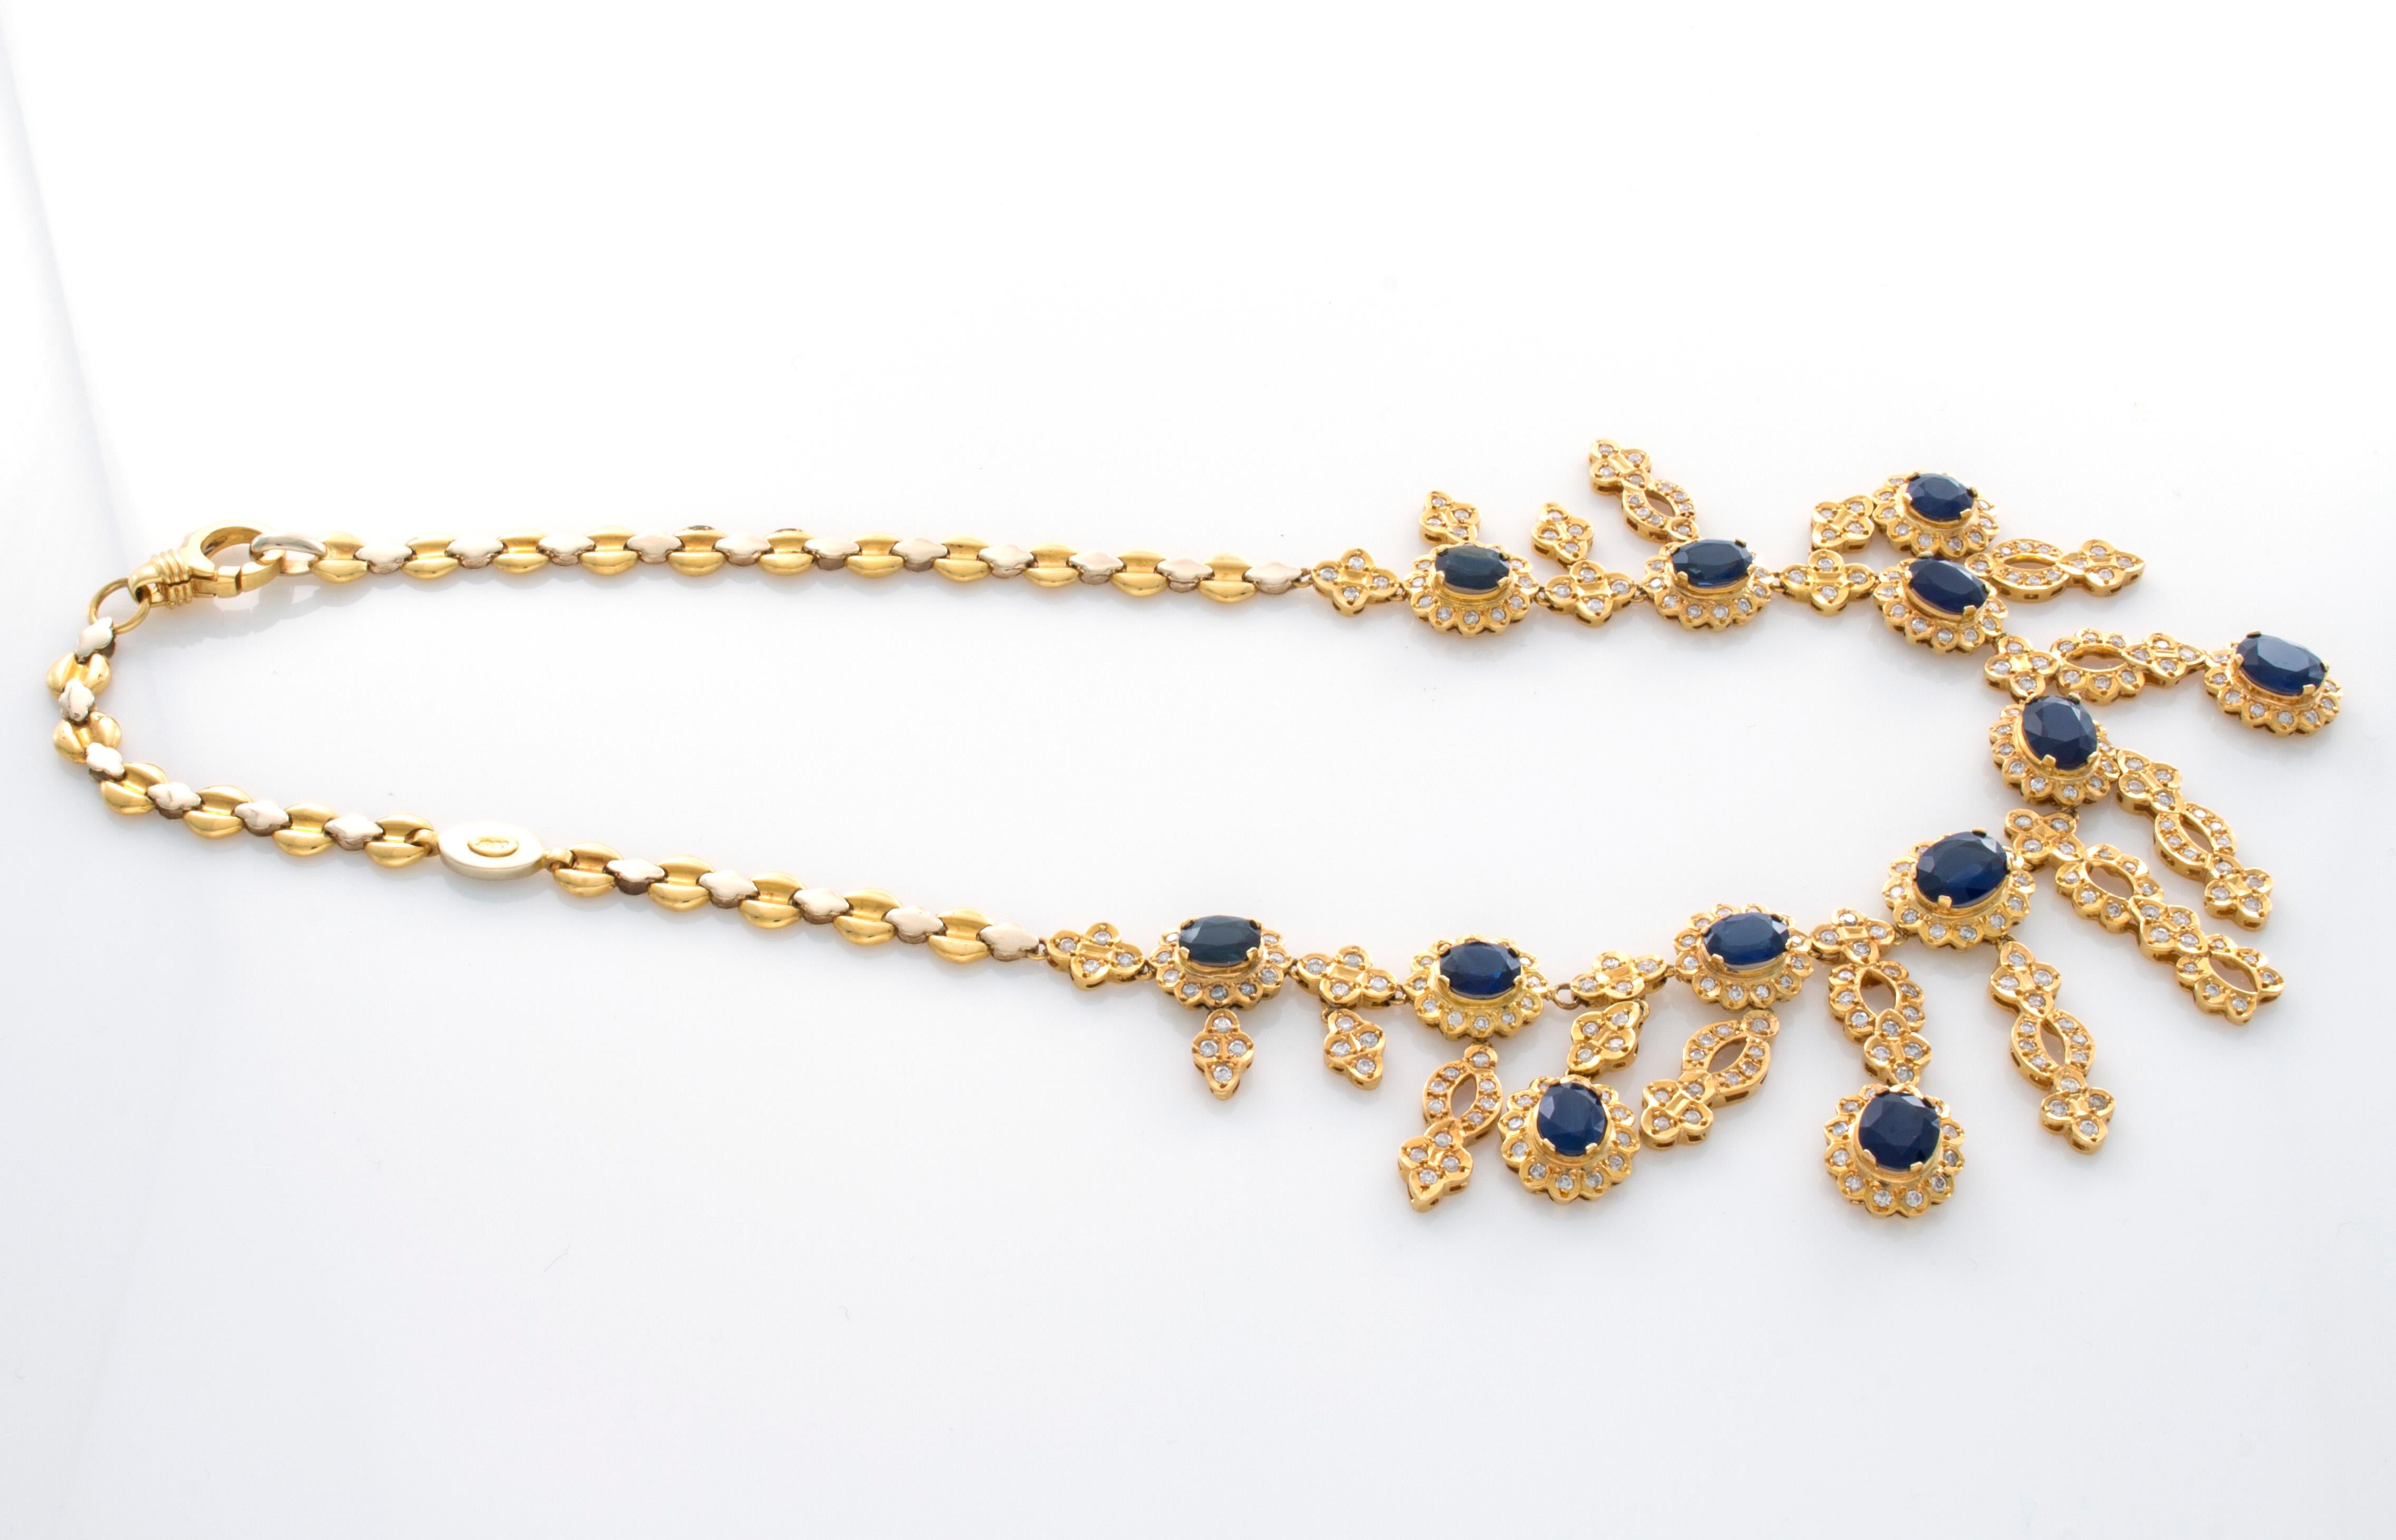 Women's 18 Karat Yellow and White Gold 30.48 Carat Sapphire and Diamond Necklace For Sale